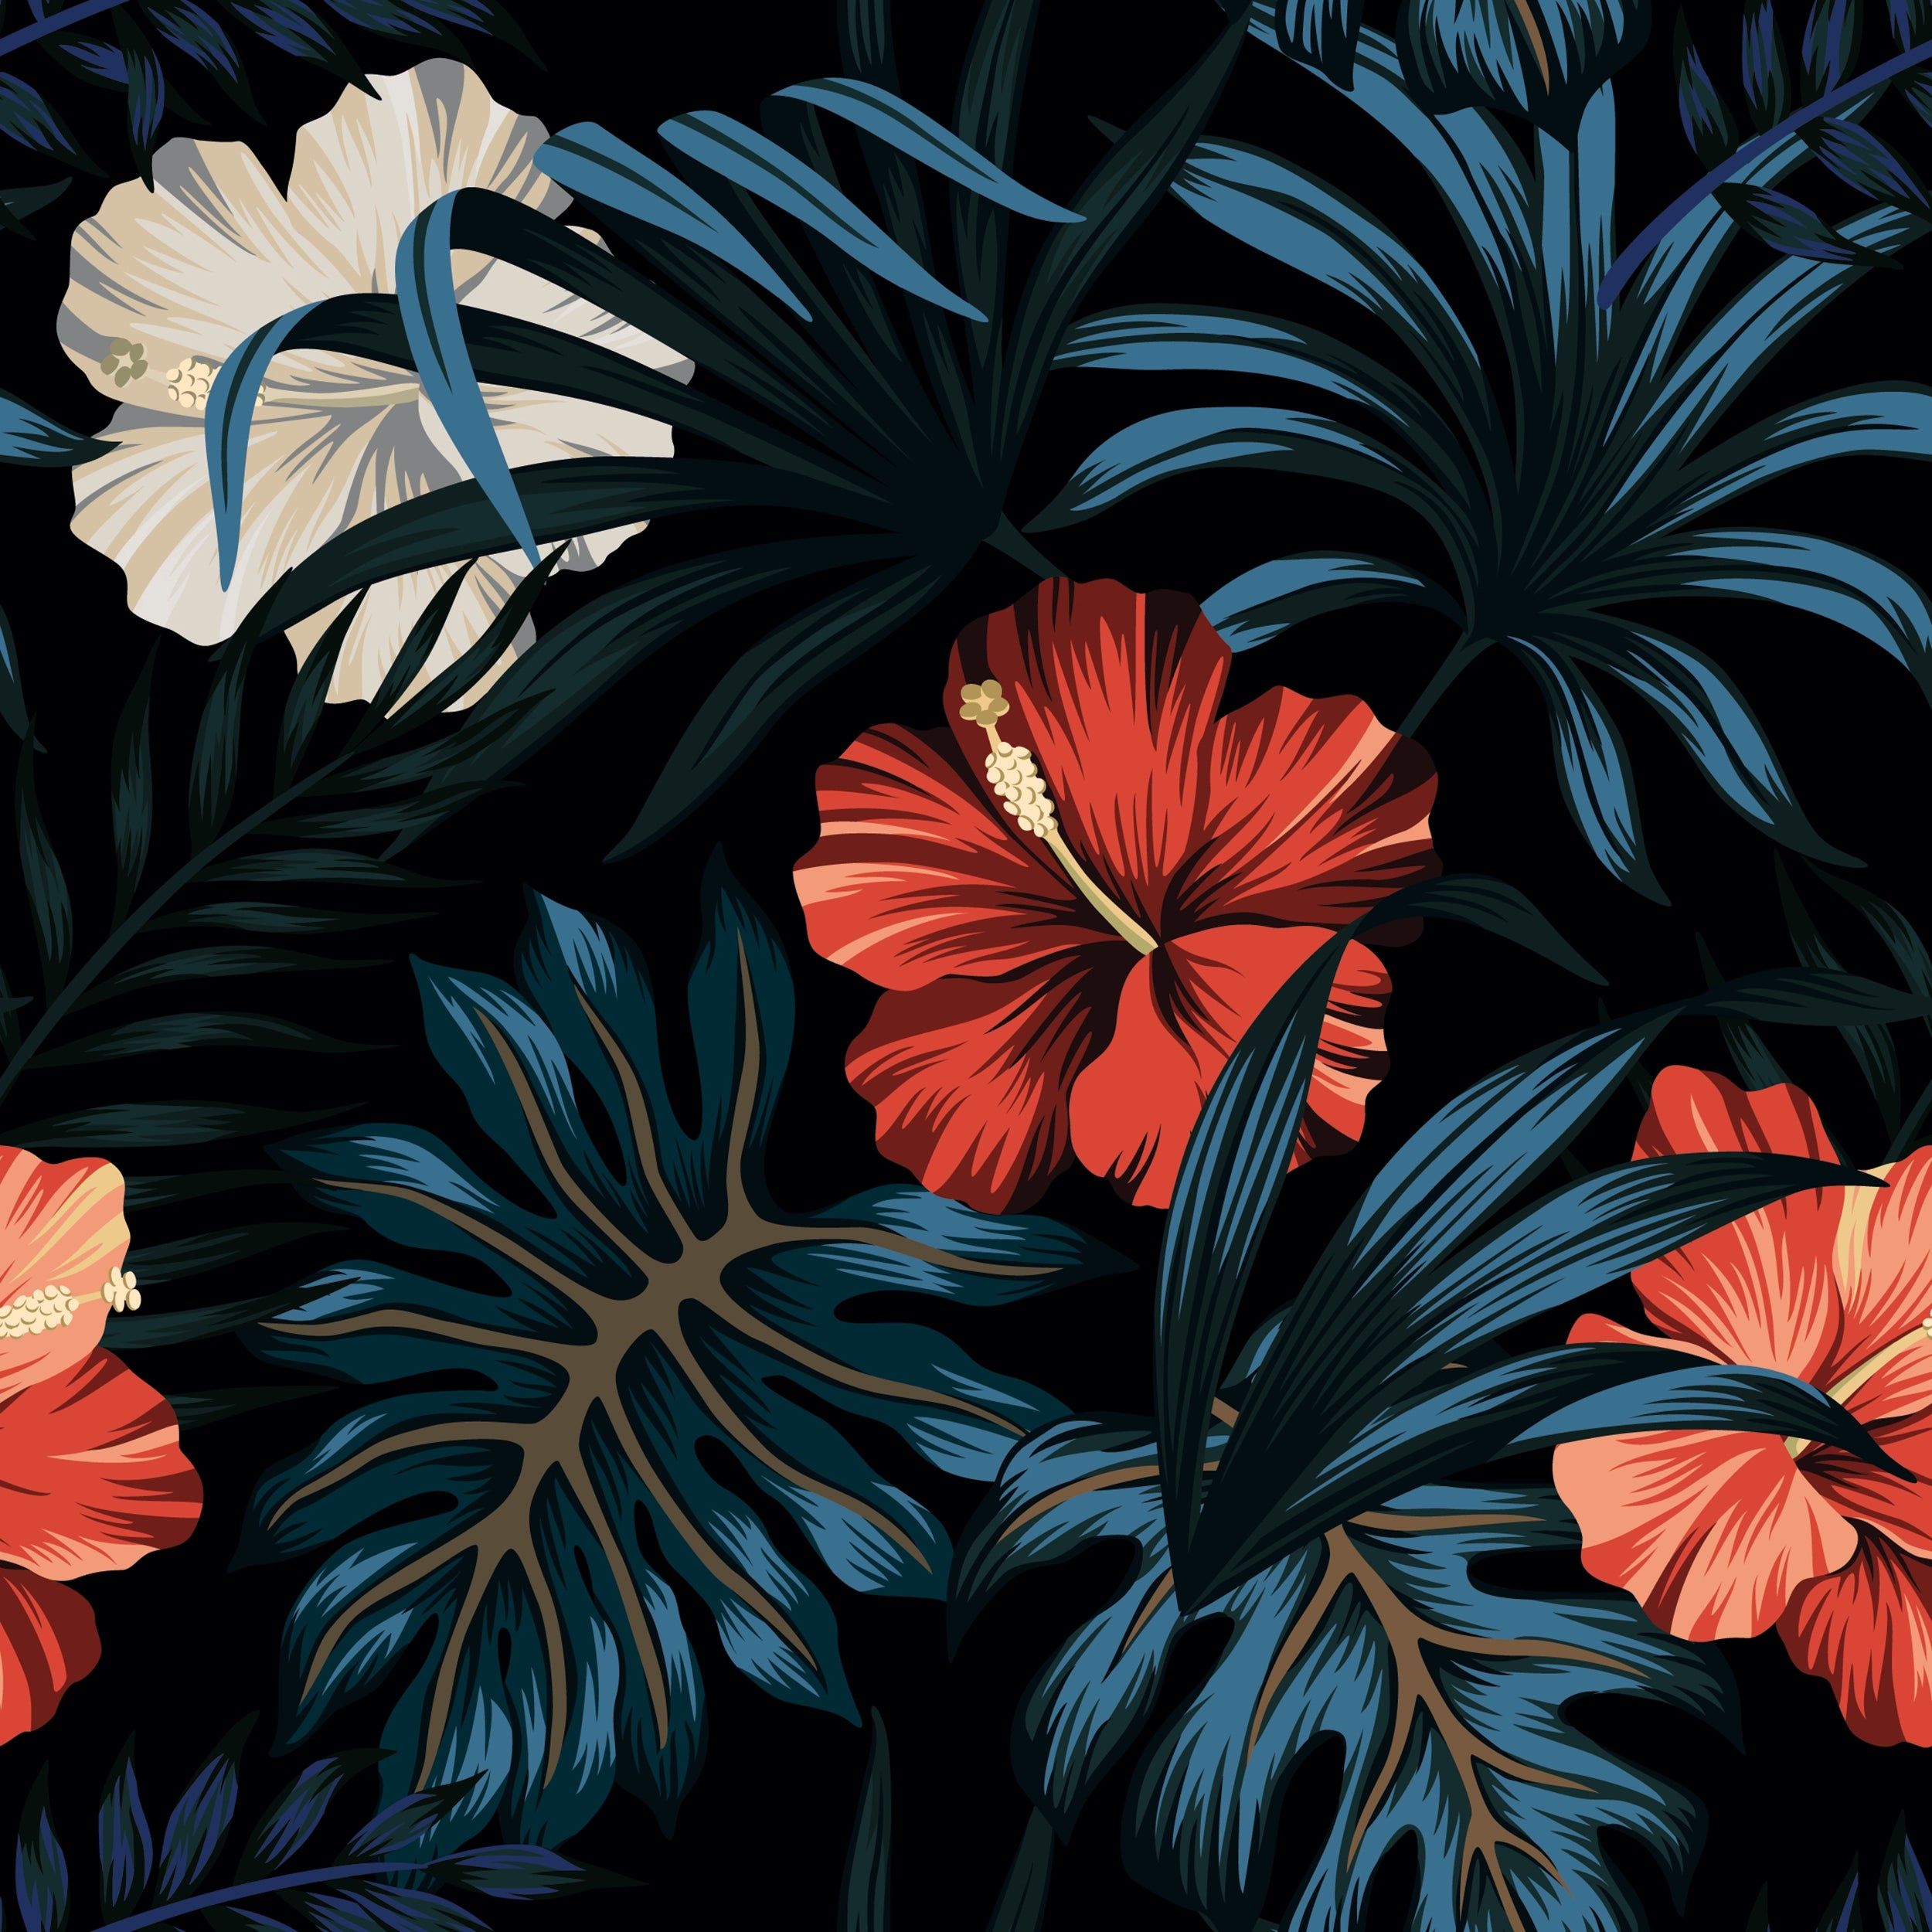 A dark floral wallpaper with red and white flowers - Hawaii, tropical